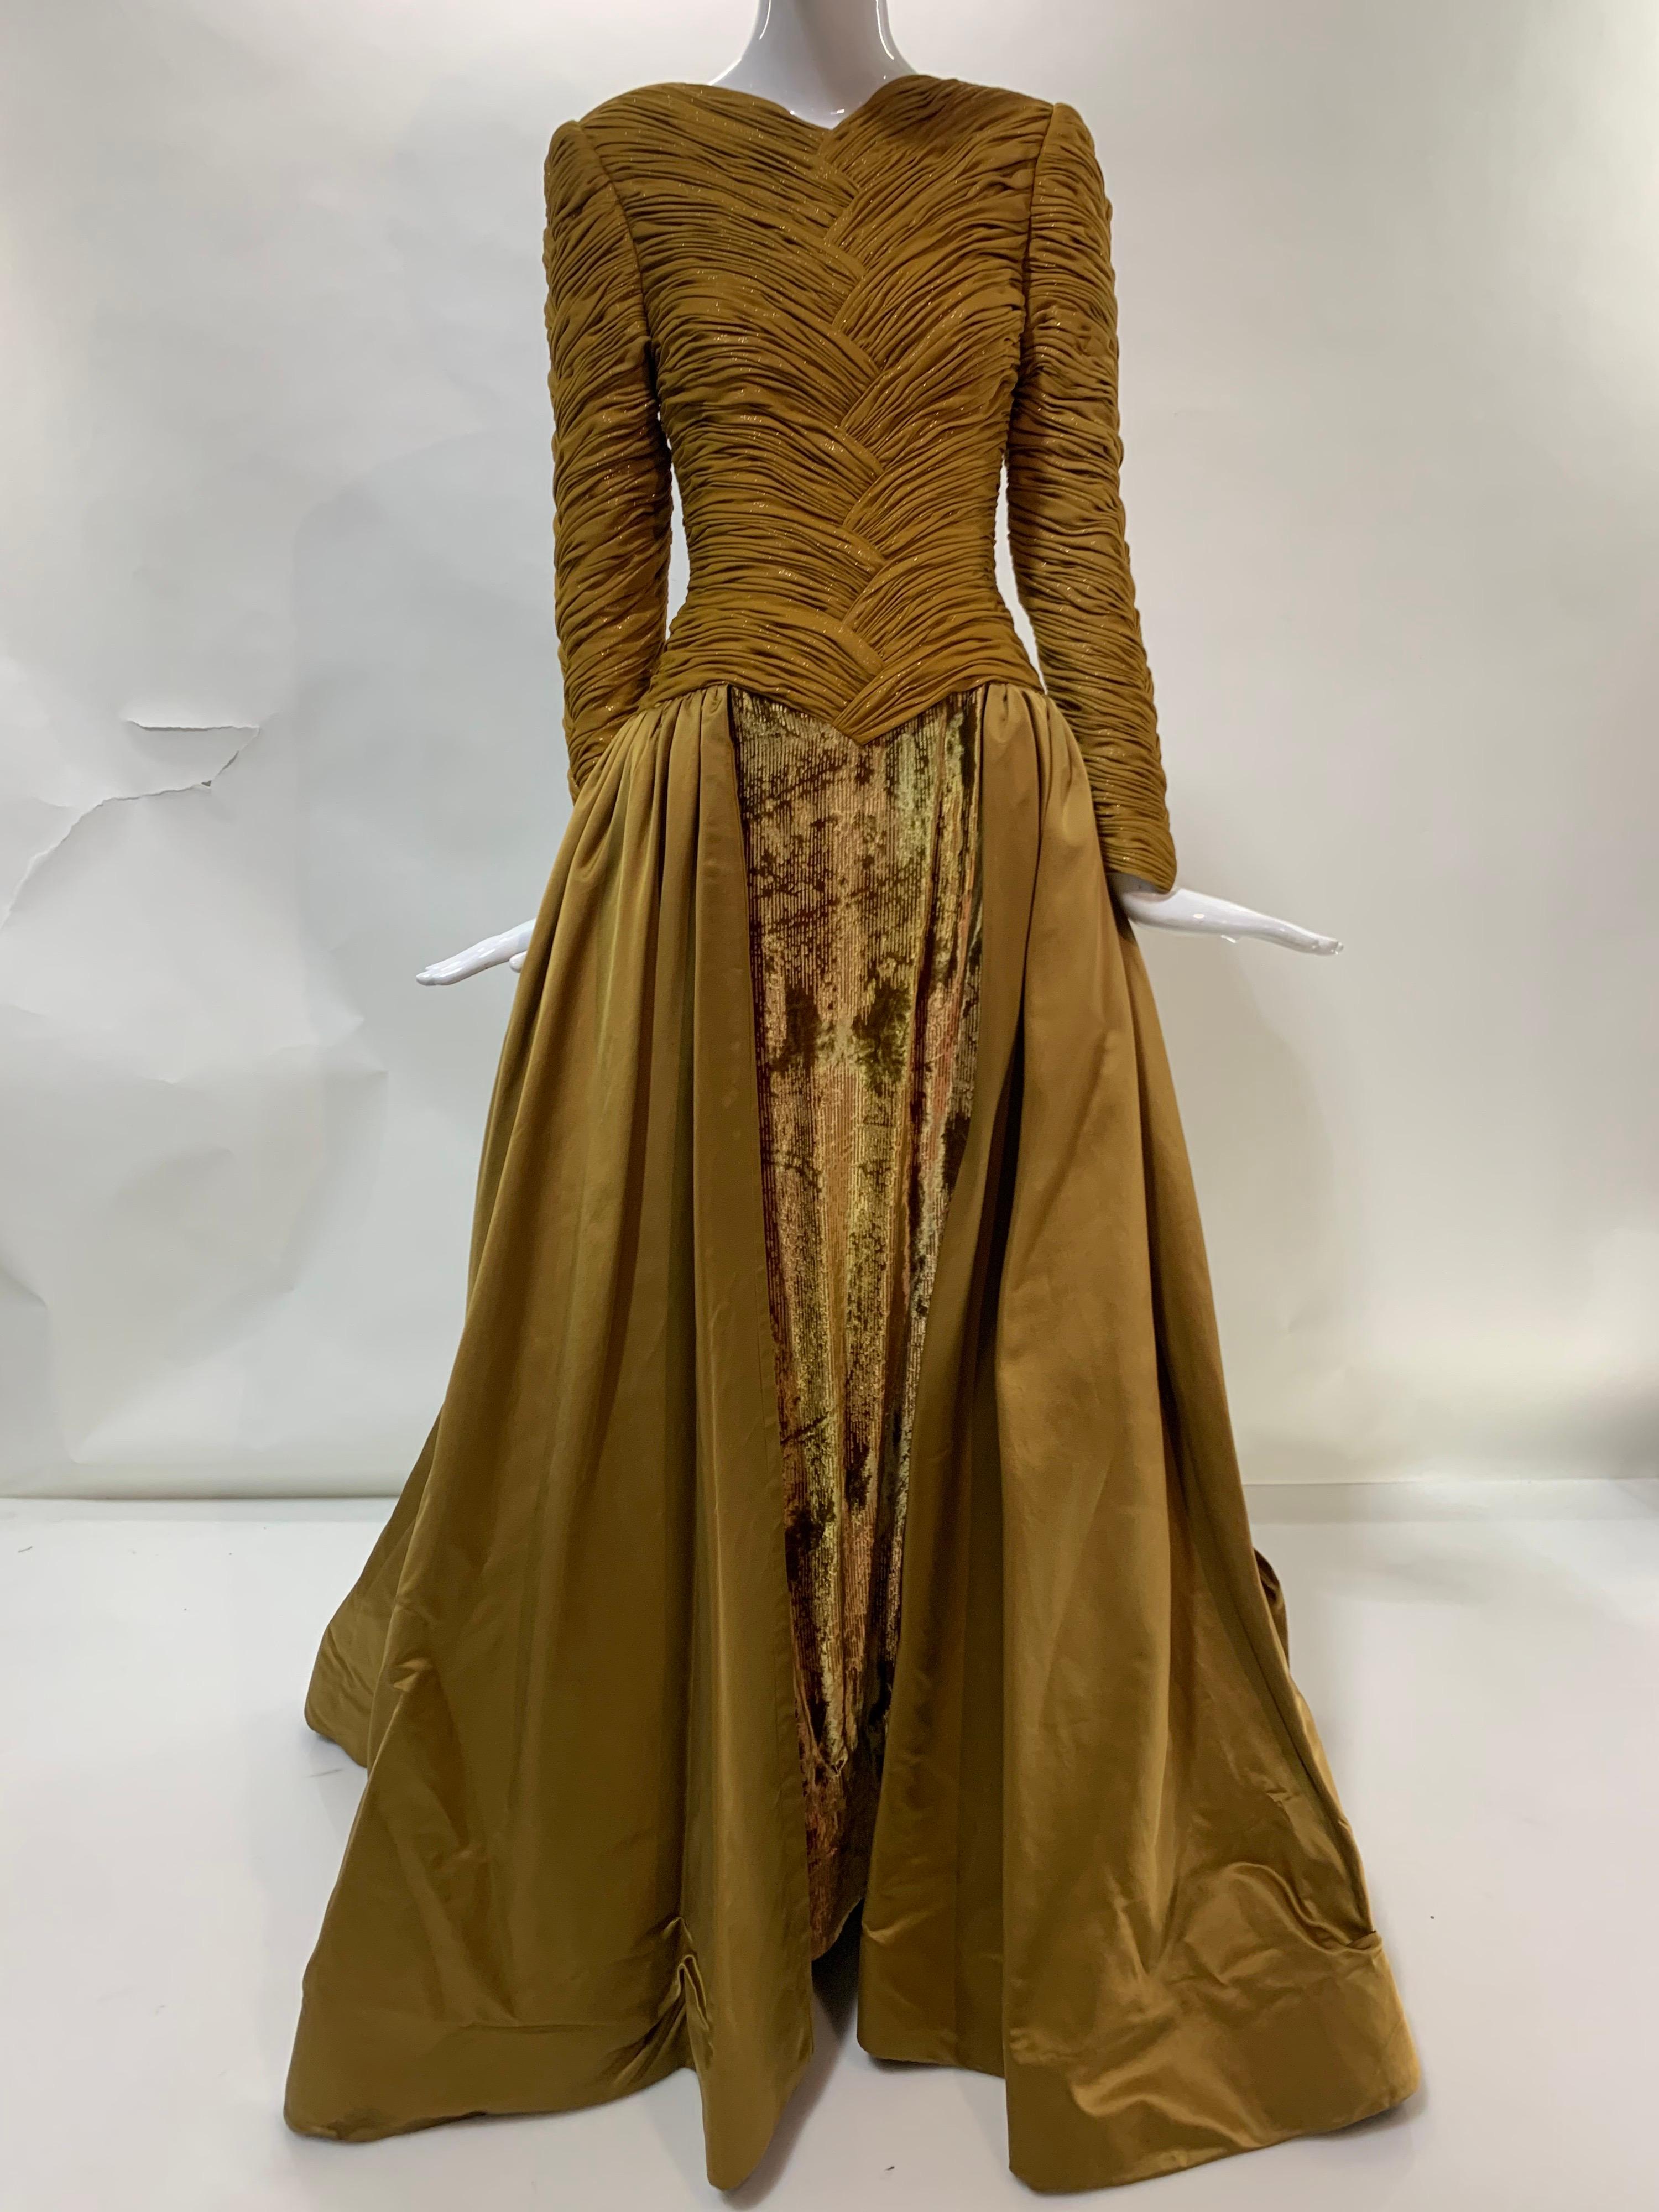 1990s Demi-Couture Gold Silk Ball Gown w/ Velvet Sheath & Dramatic Satin Skirt  In Excellent Condition For Sale In Gresham, OR